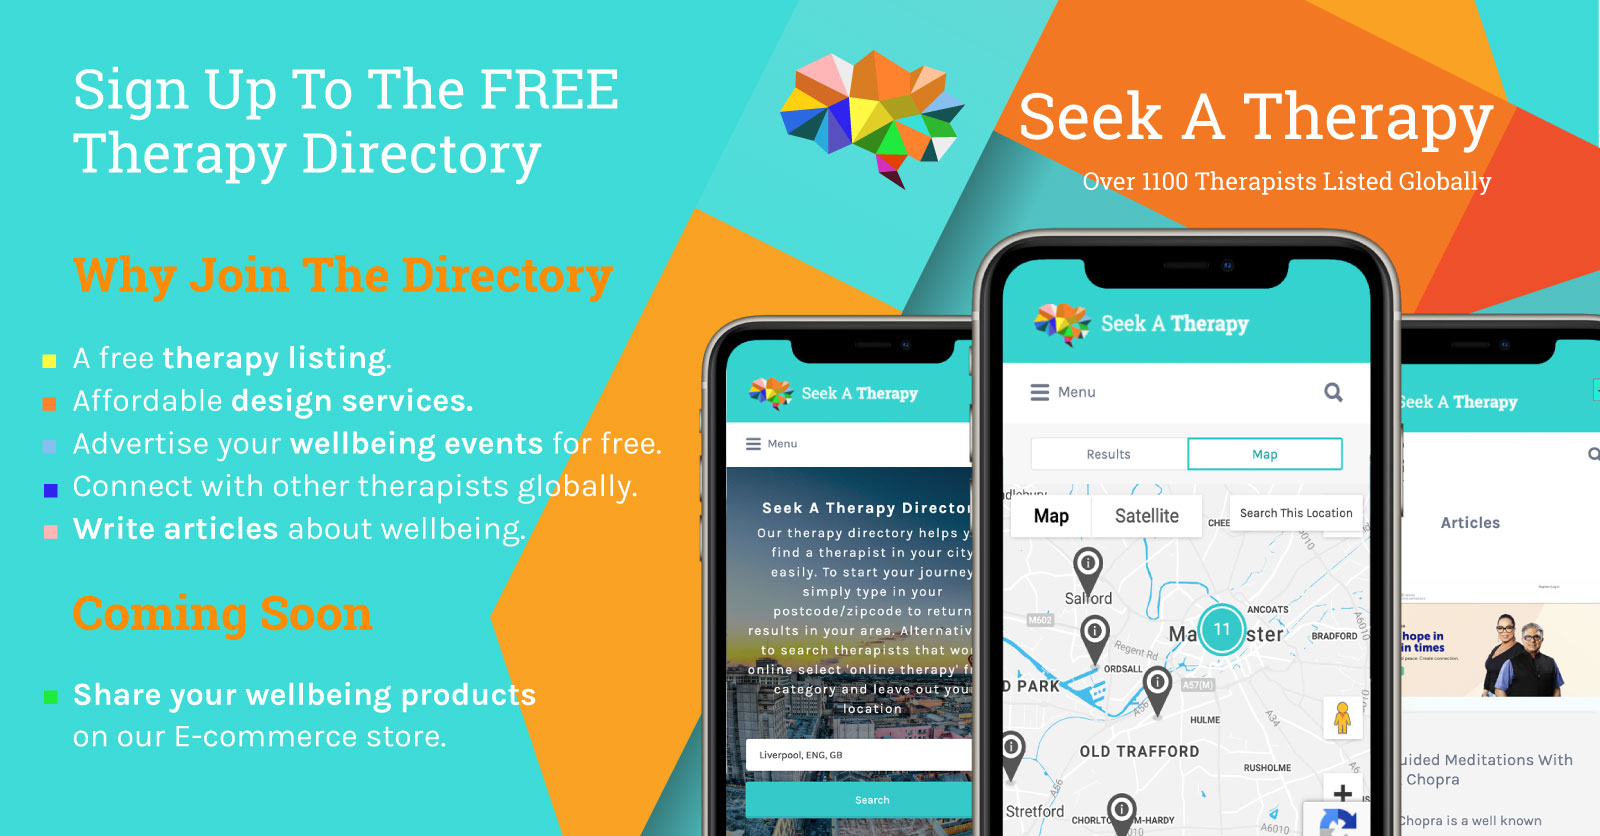 Seek A Therapy Free Therapy Directory